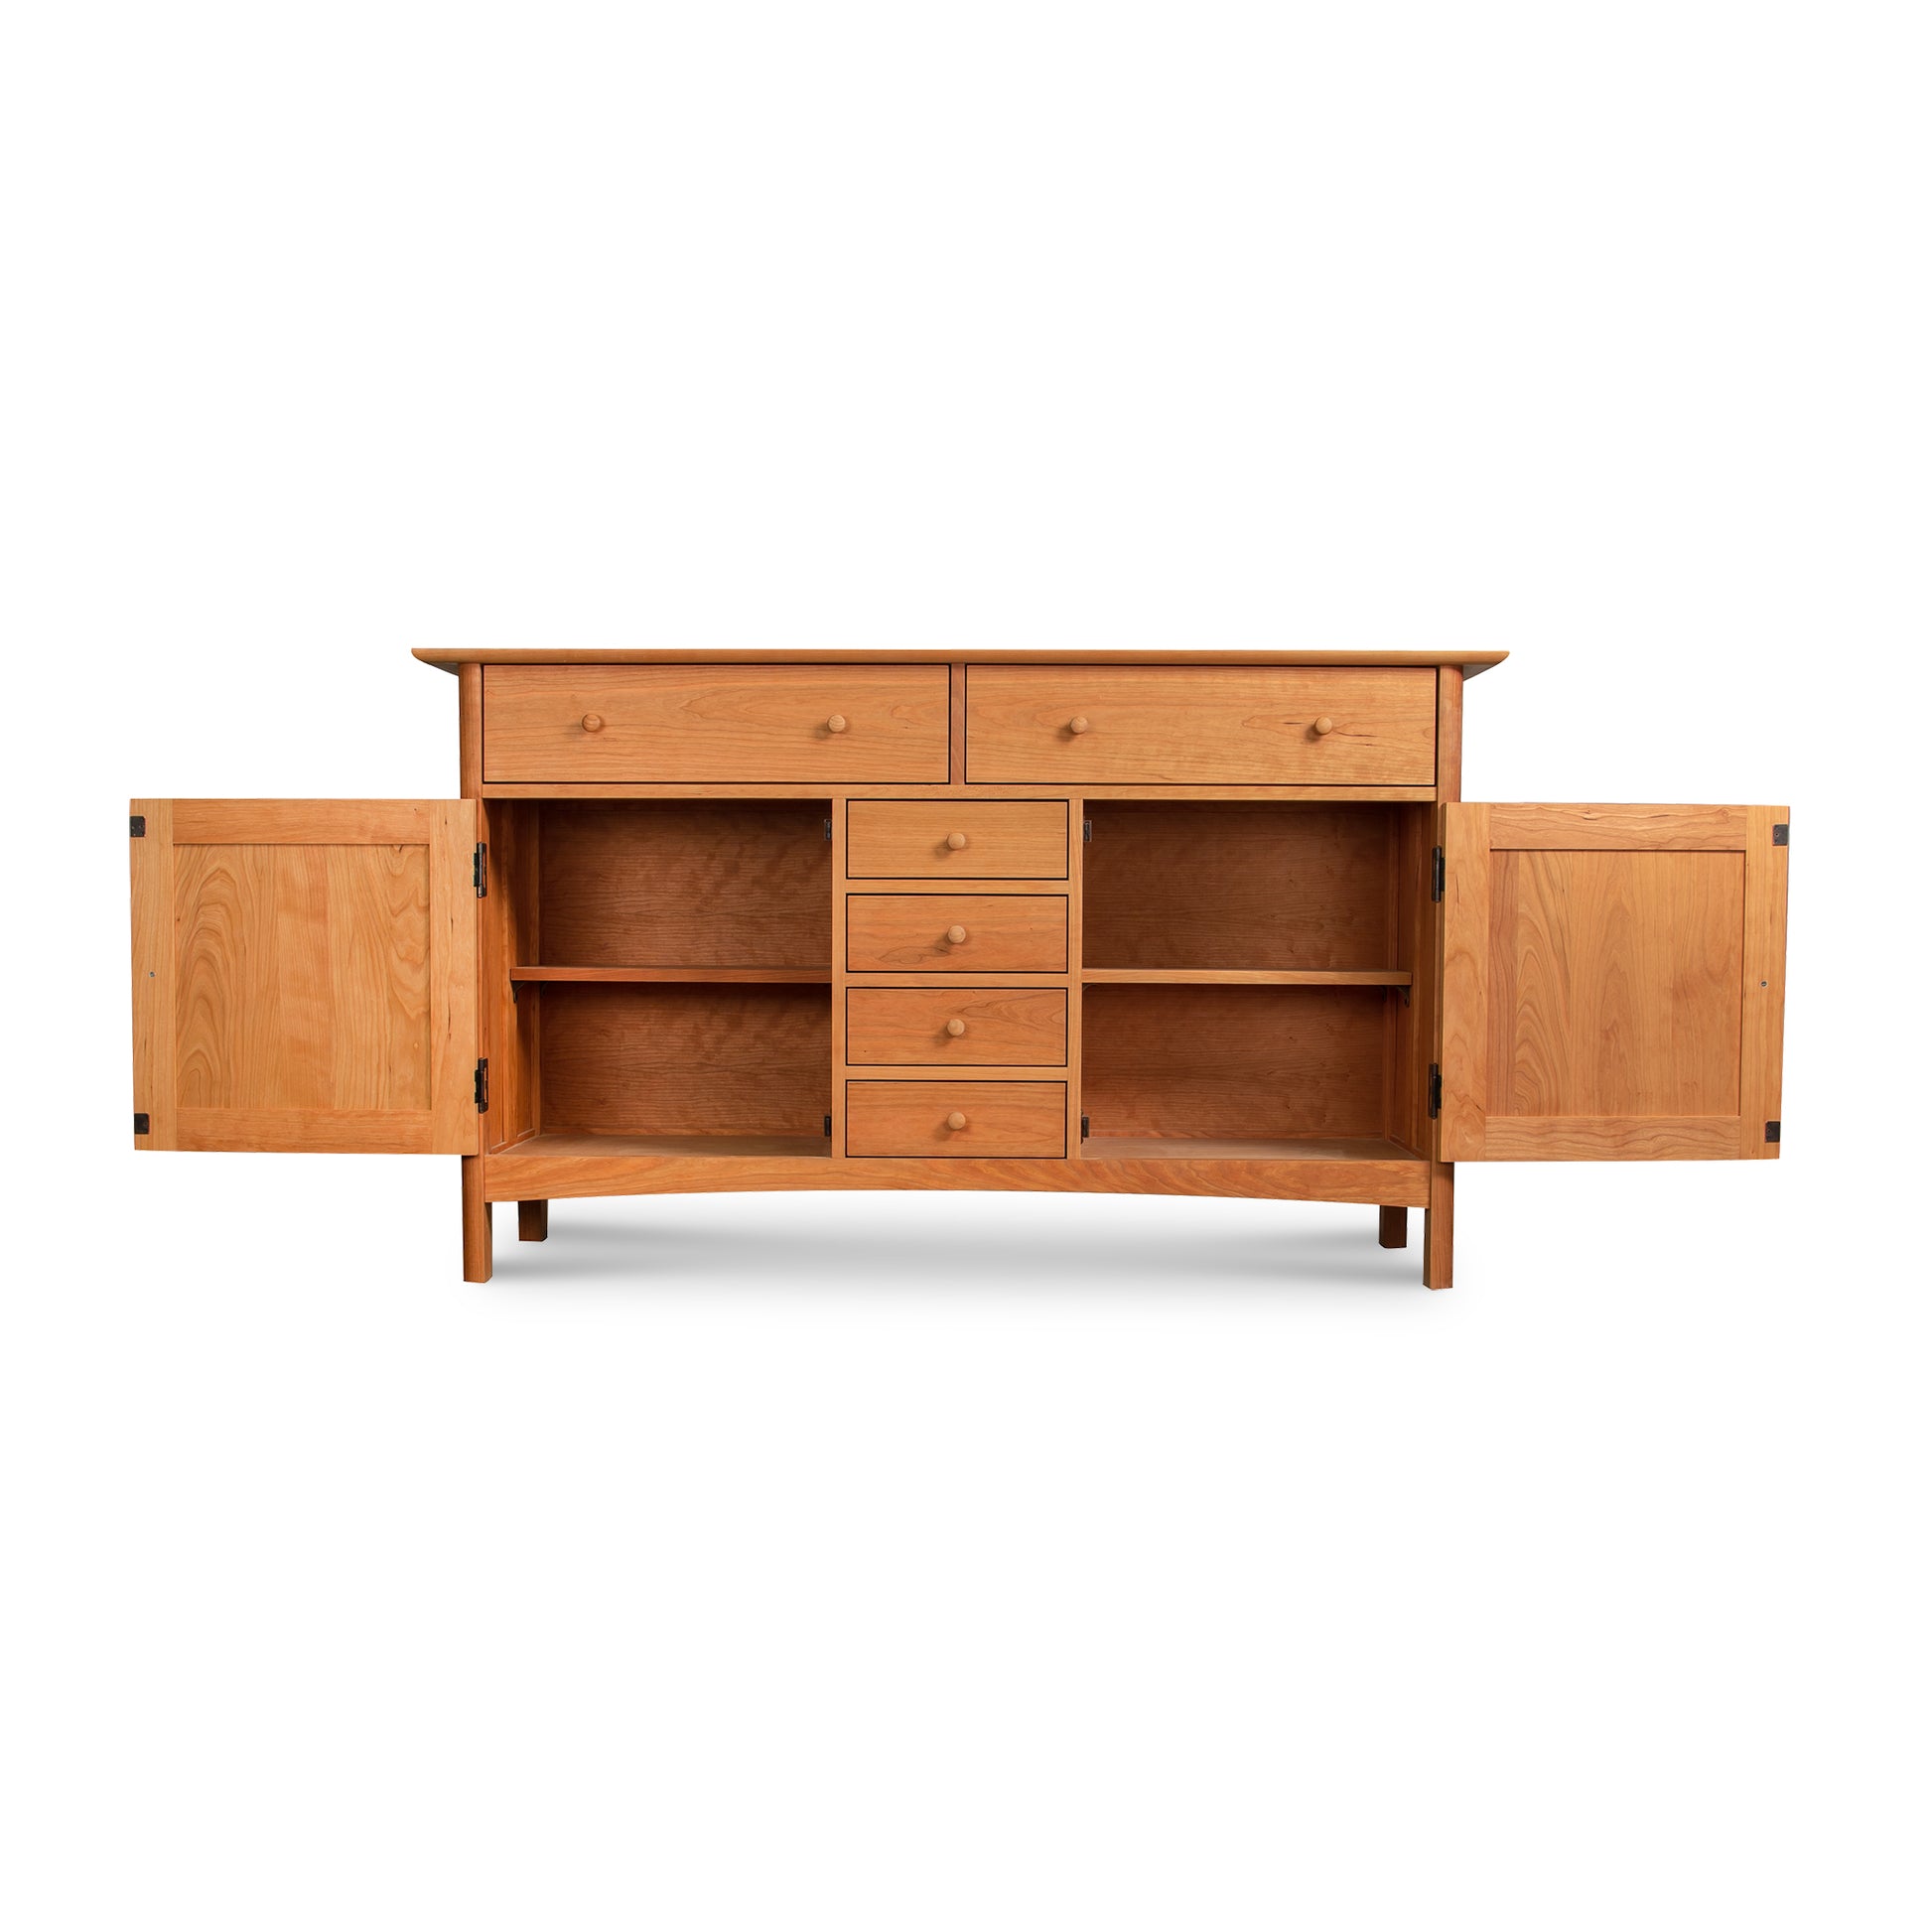 A Vermont Furniture Designs Heartwood Shaker Sideboard crafted from solid hardwoods with open doors and drawers revealing internal shelves and compartments, isolated on a white background.